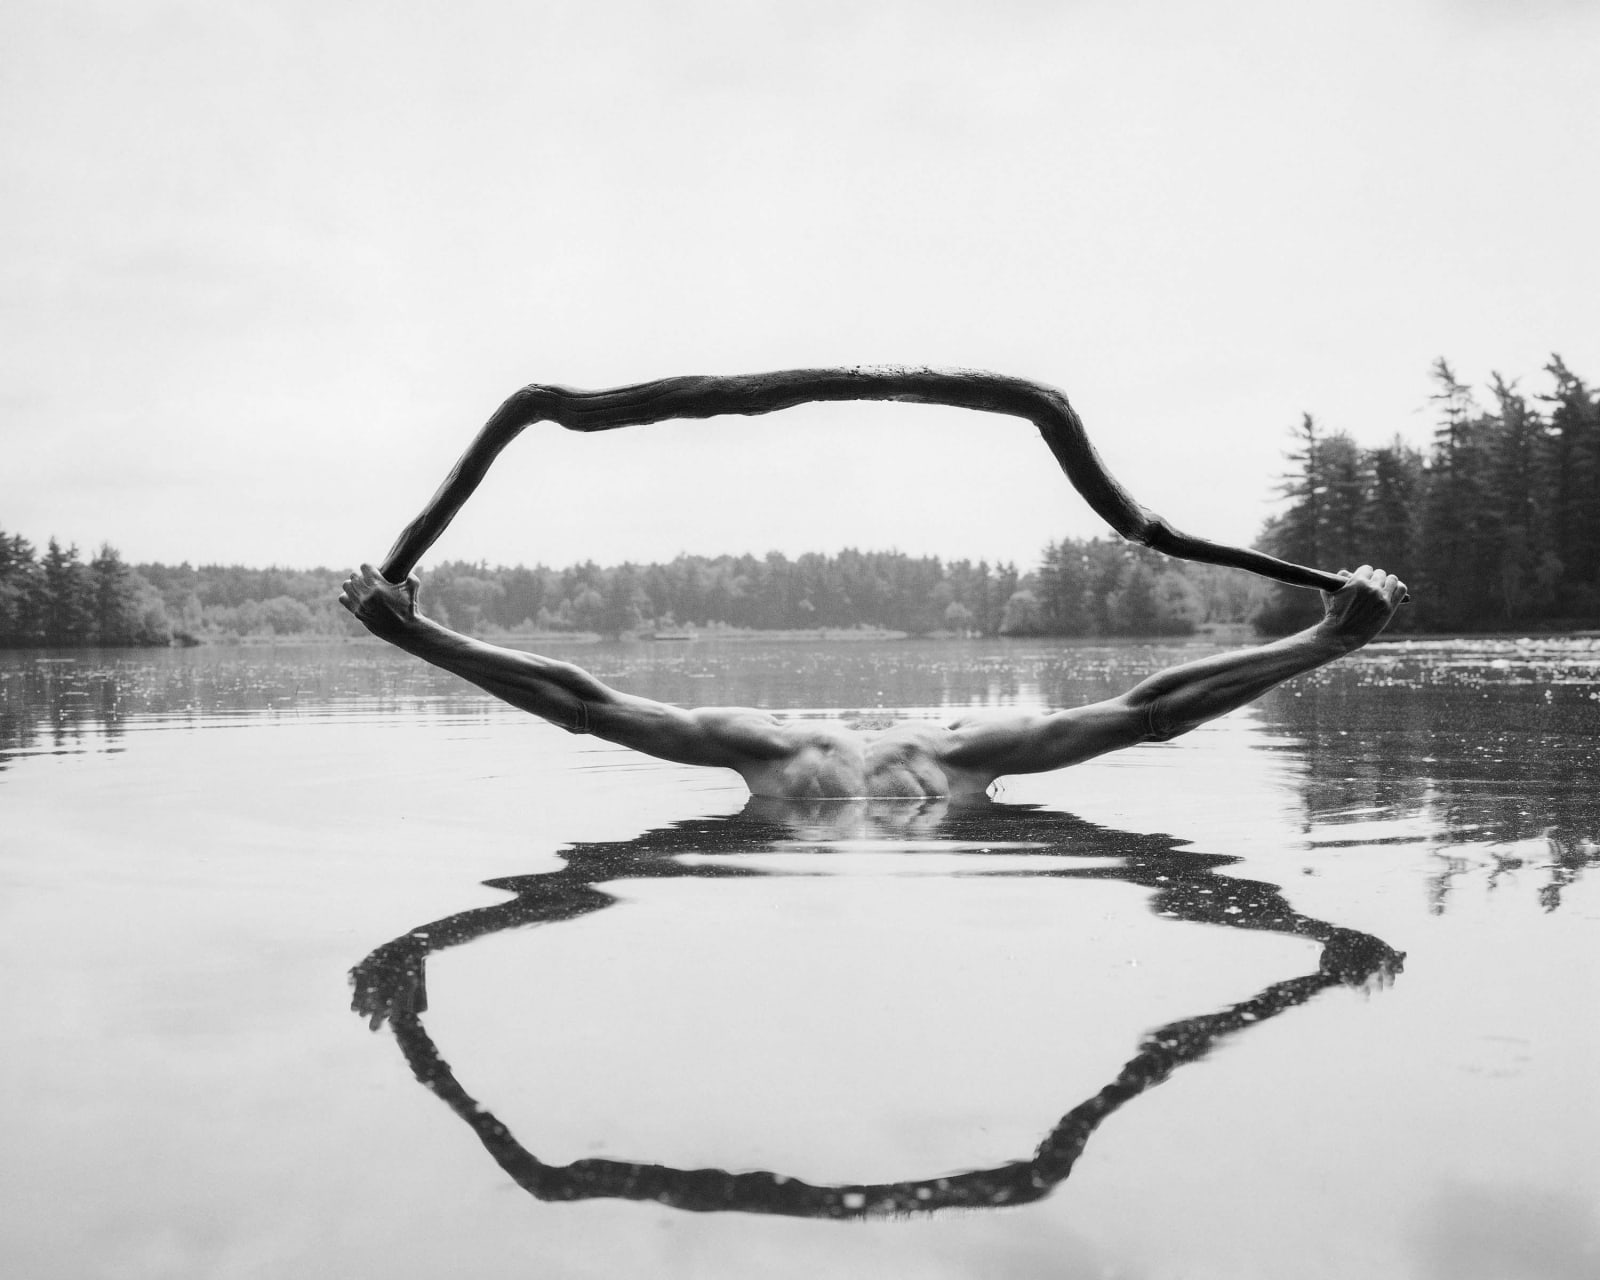 Arno Minkkinen Ismo's Stick, Fosters Pond straight photograph optical illusion of man's arms holding stick reflected in pond surface to make a figure eight